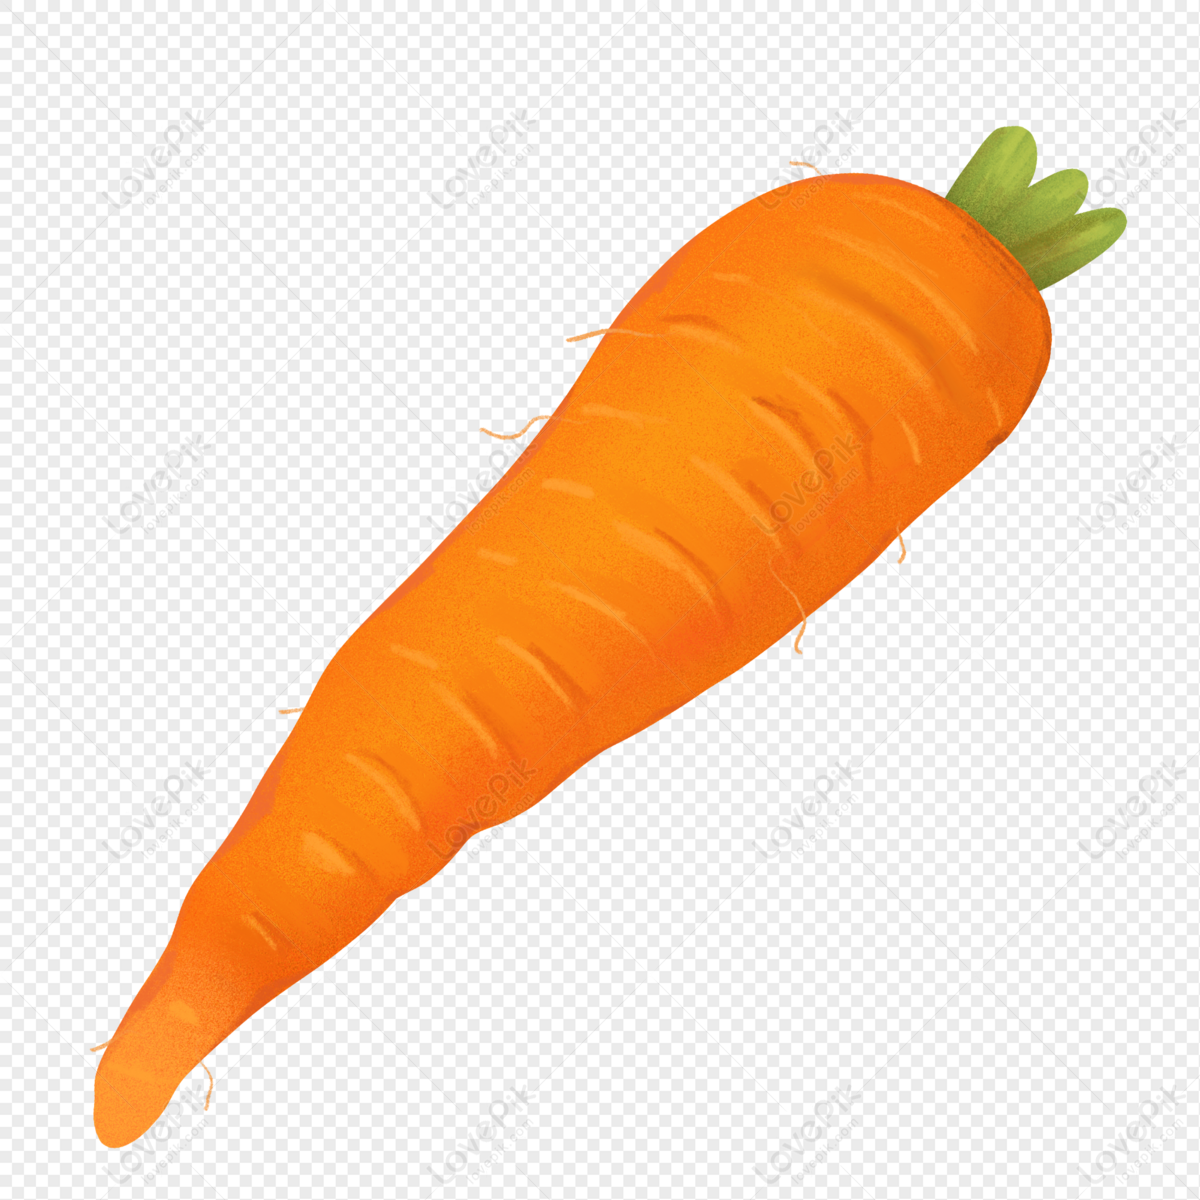 Hand Drawn Vegetable Carrot, Healthy, Drawn, Hand Drawn PNG Transparent ...